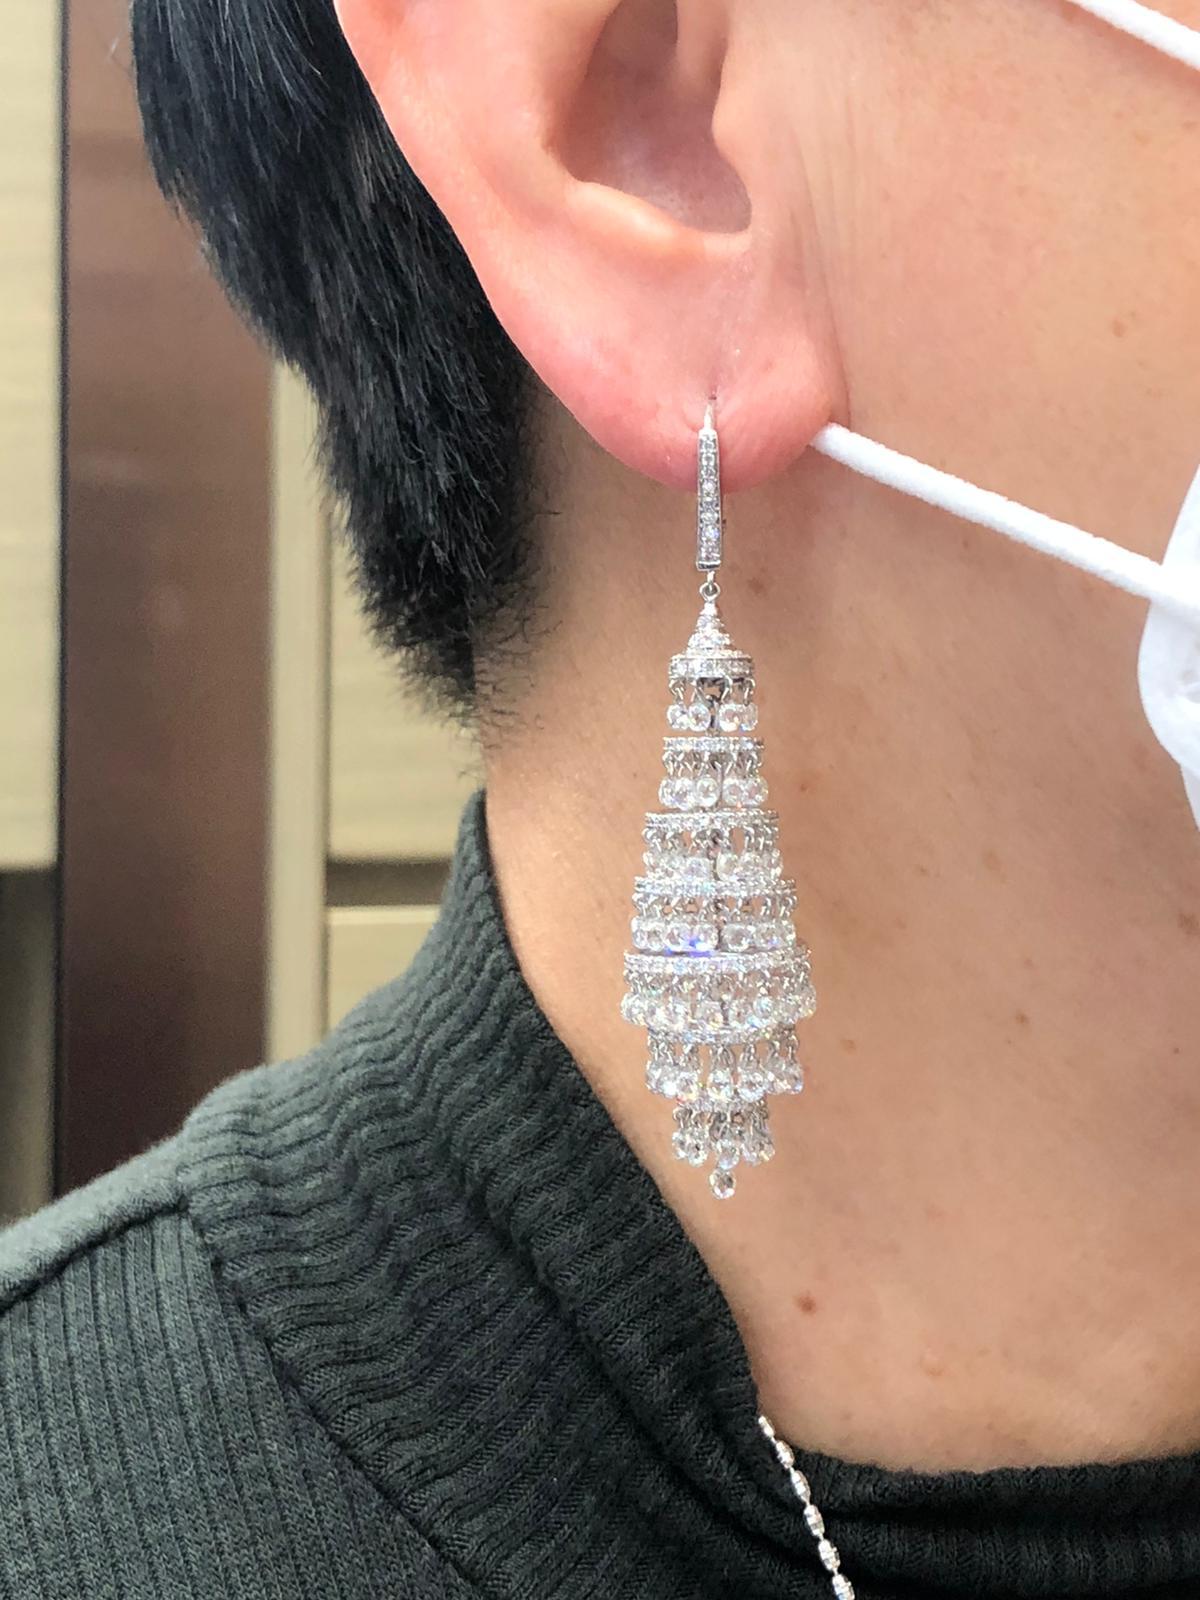 PANIM 24.06 carats Diamond Briolette Chandelier Earring in 18K White Gold

Our Diamond Briolette chandelier earring is charming & sensational. It Brings the natural effect and use of Diamond Briolettes which are suspending bringing shine and luster